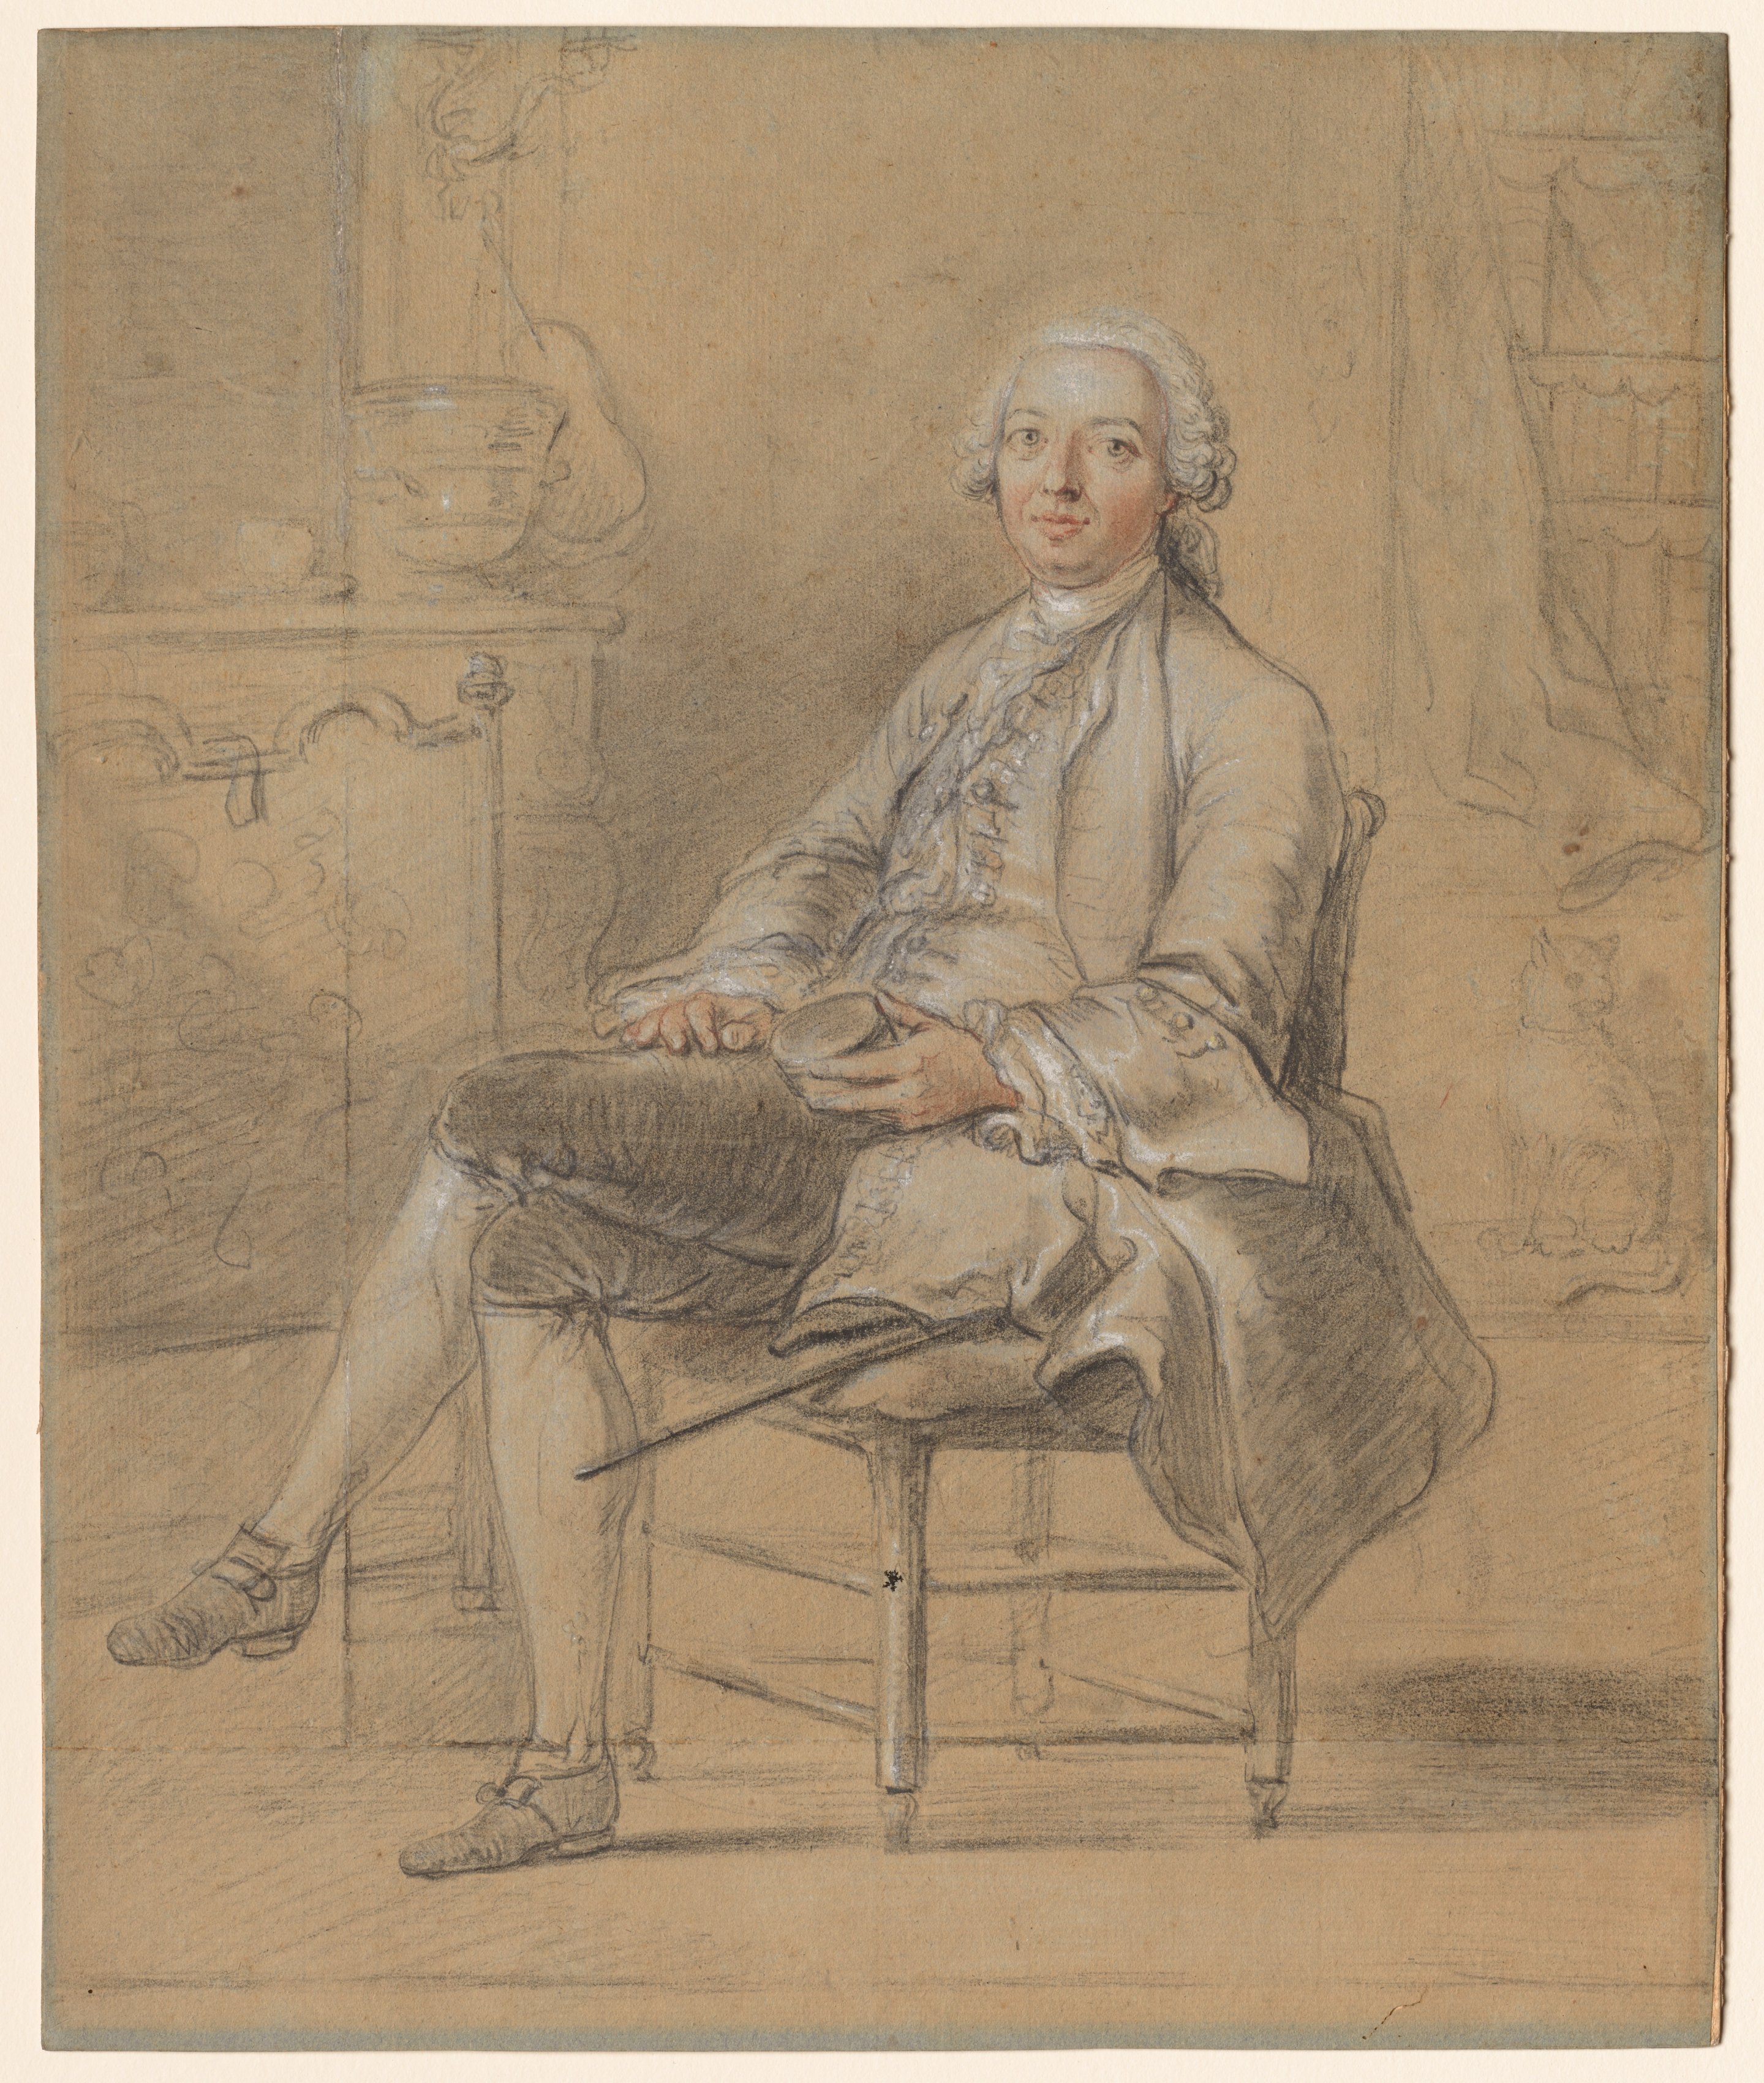 Seated Man Holding a Snuff Box